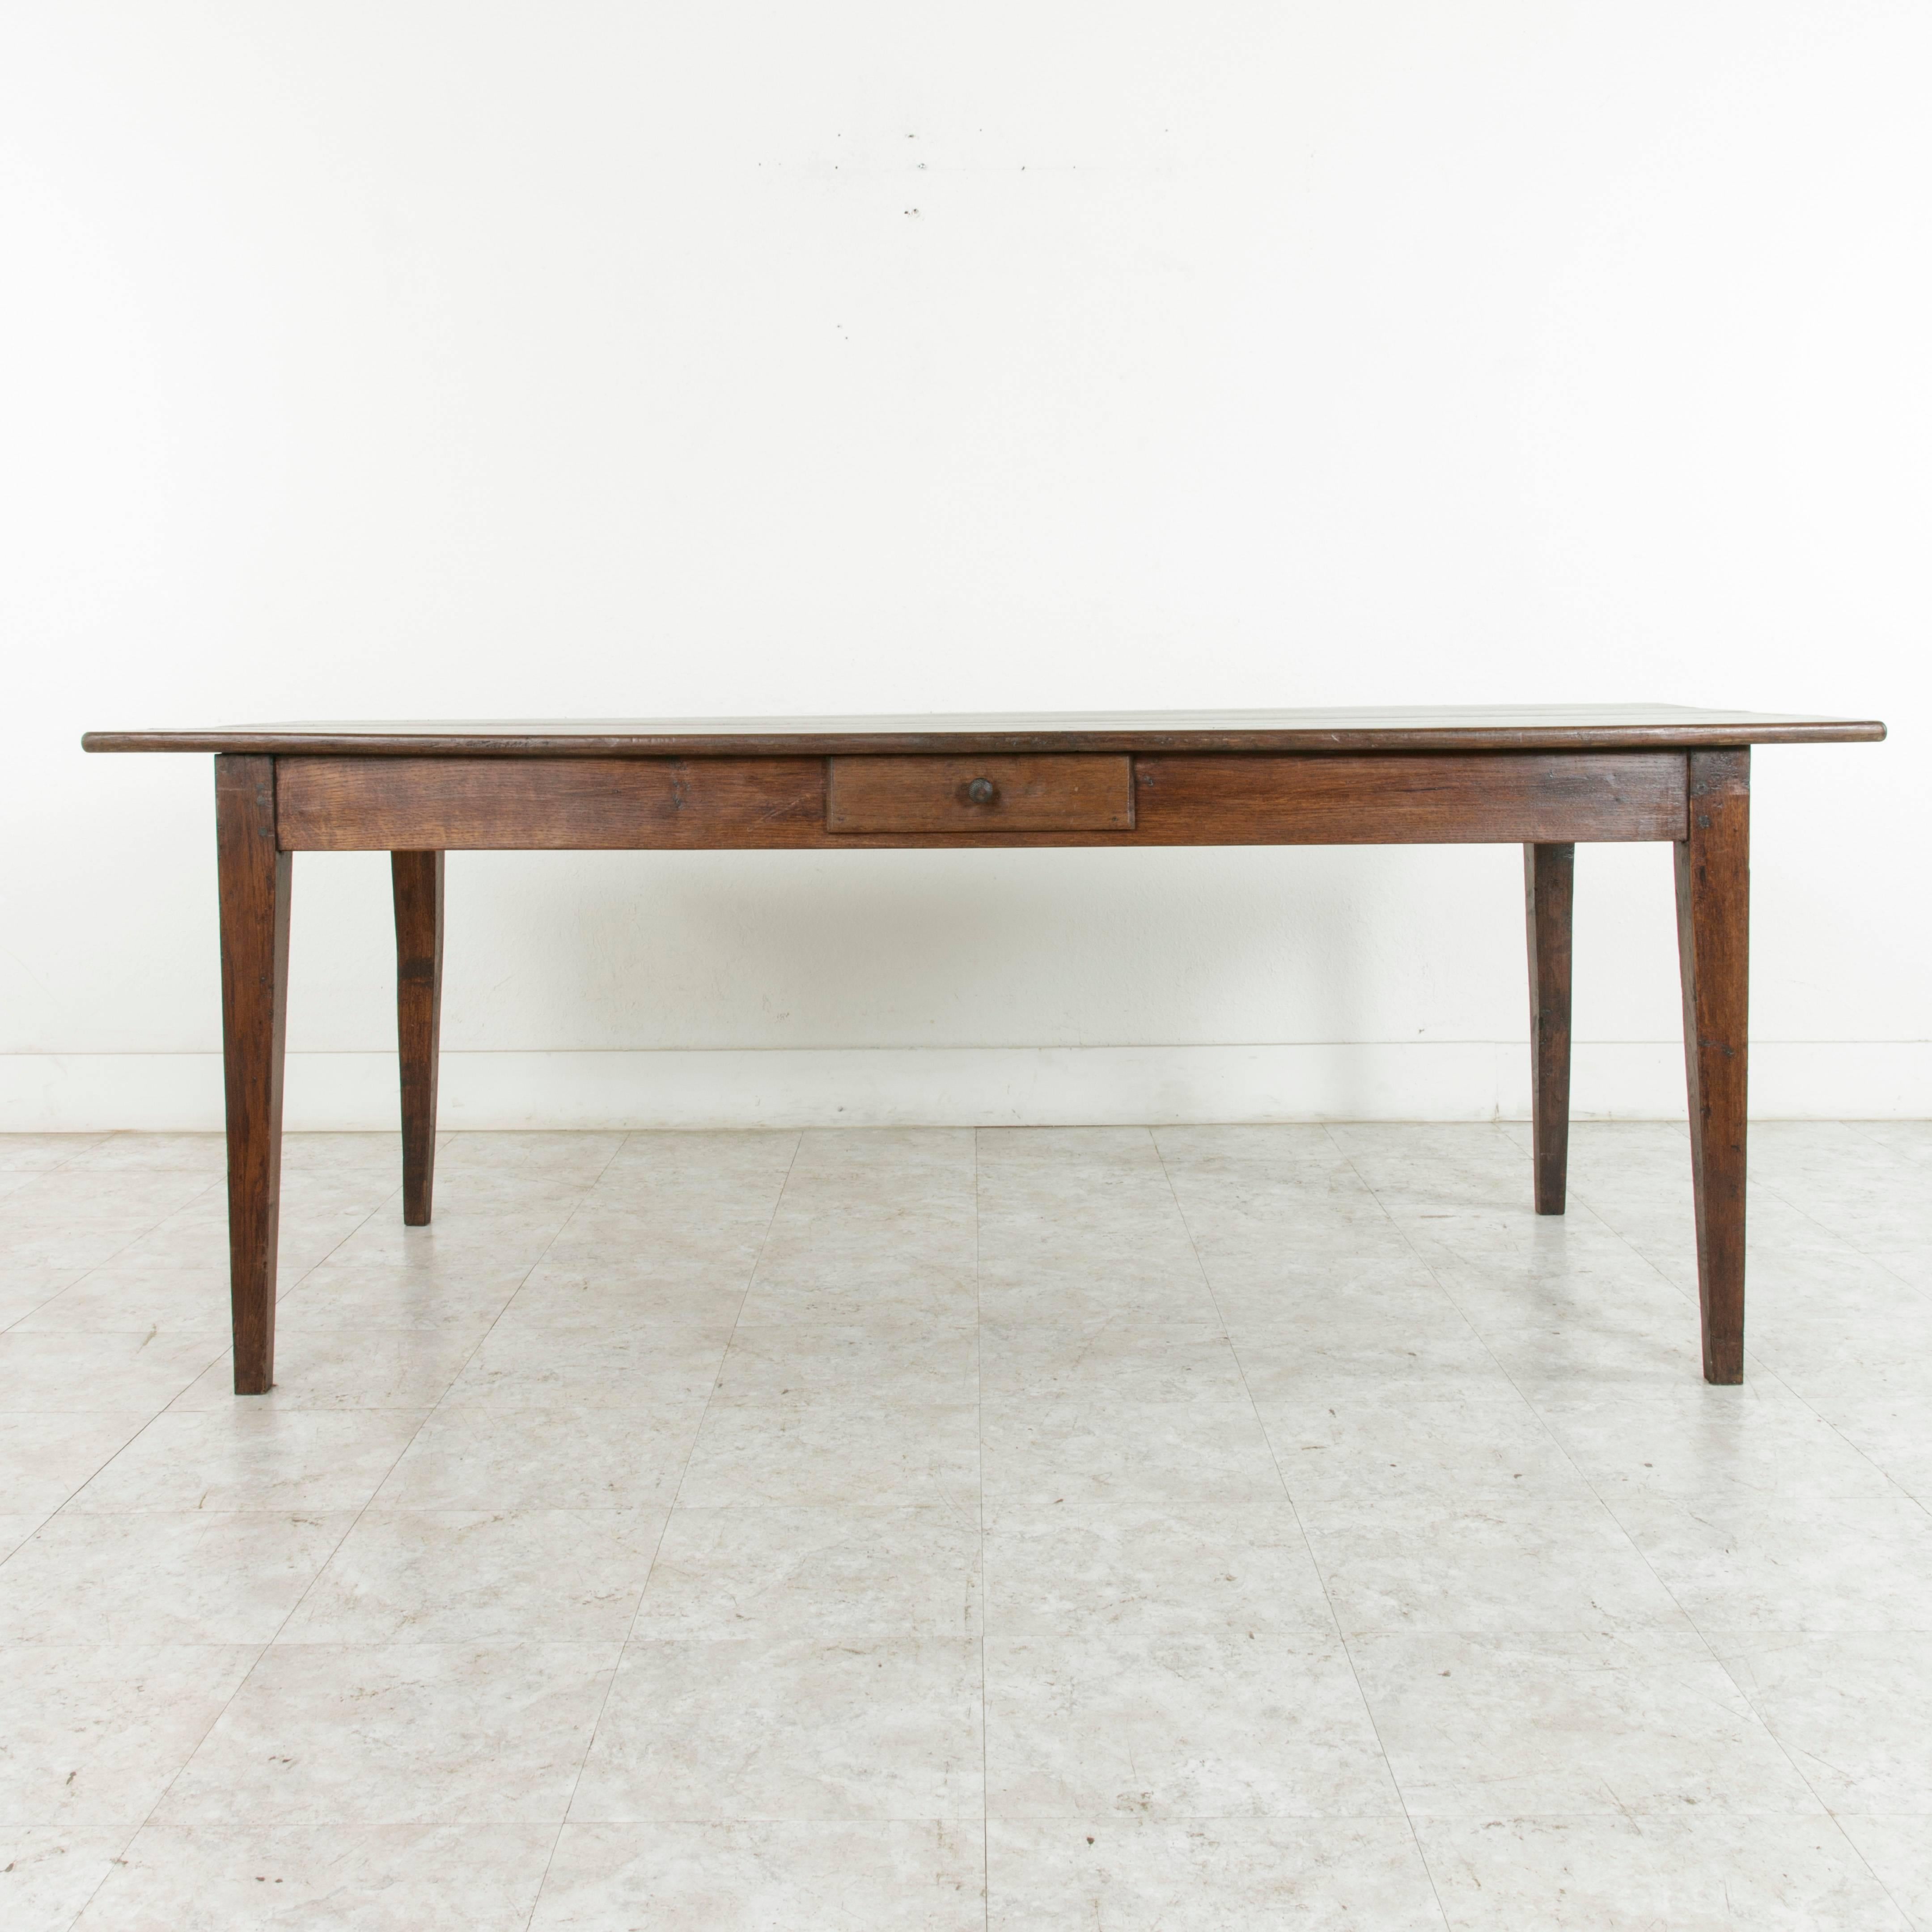 Rustic French Hand-Carved Oak Farm Table or Dining Table with Single Drawer, circa 1900